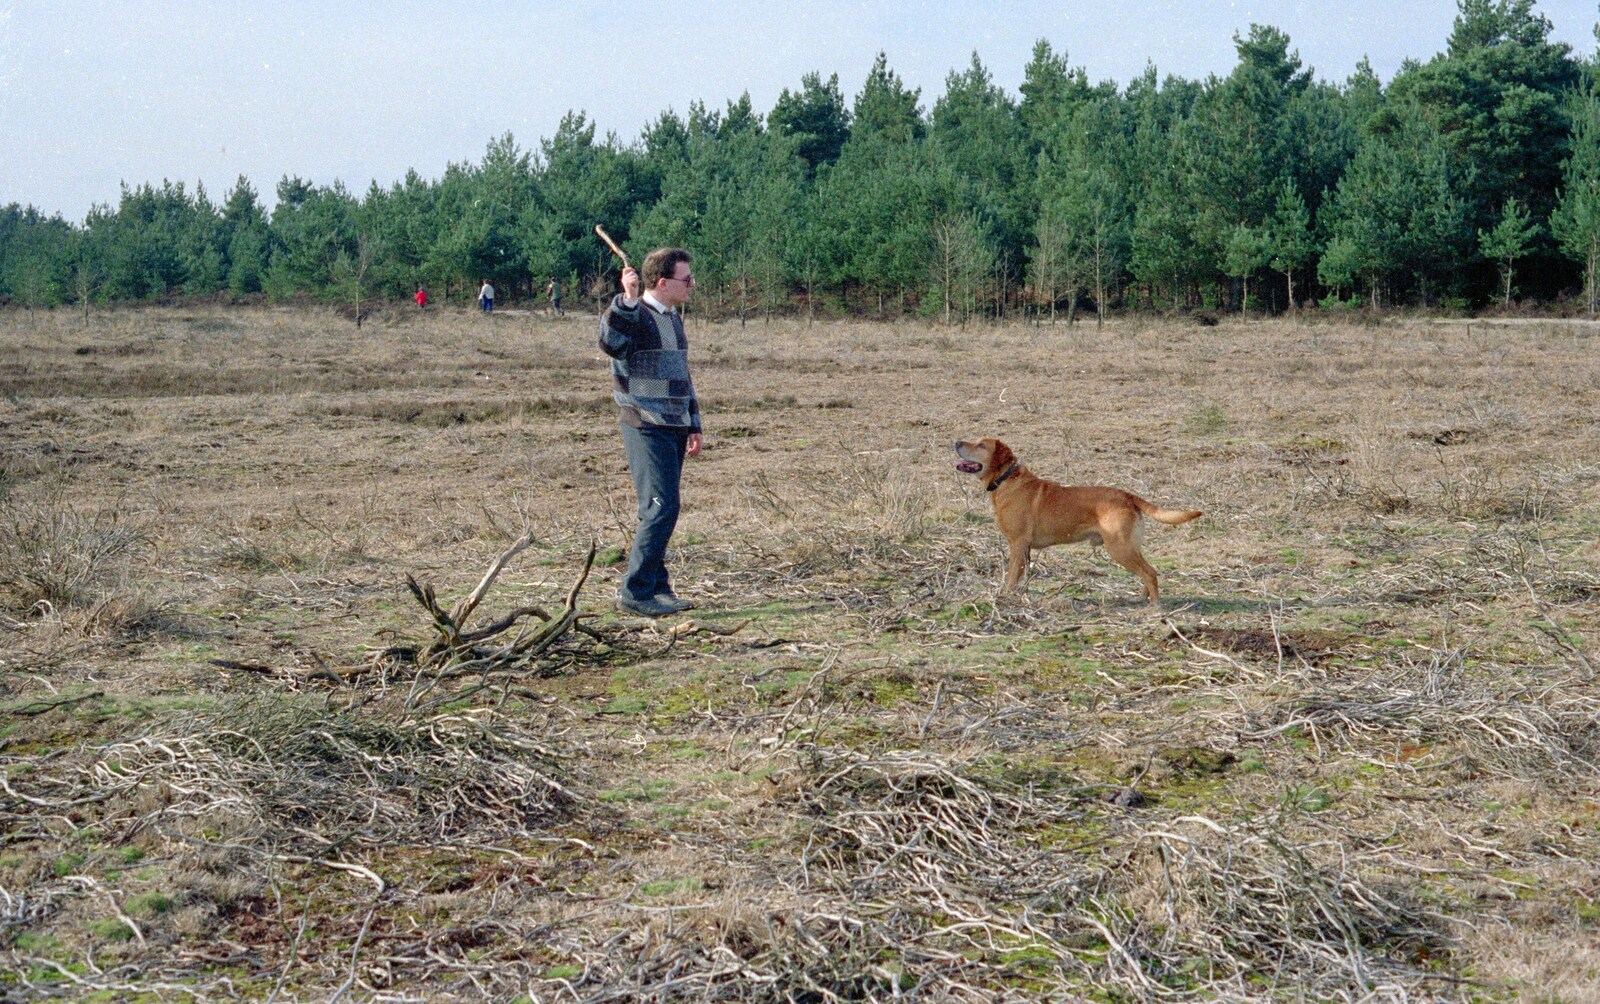 Hamish lobs a stick for Geordie from The Vineyard, Christchurch and Pizza, New Milton and the New Forest - 2nd April 1989